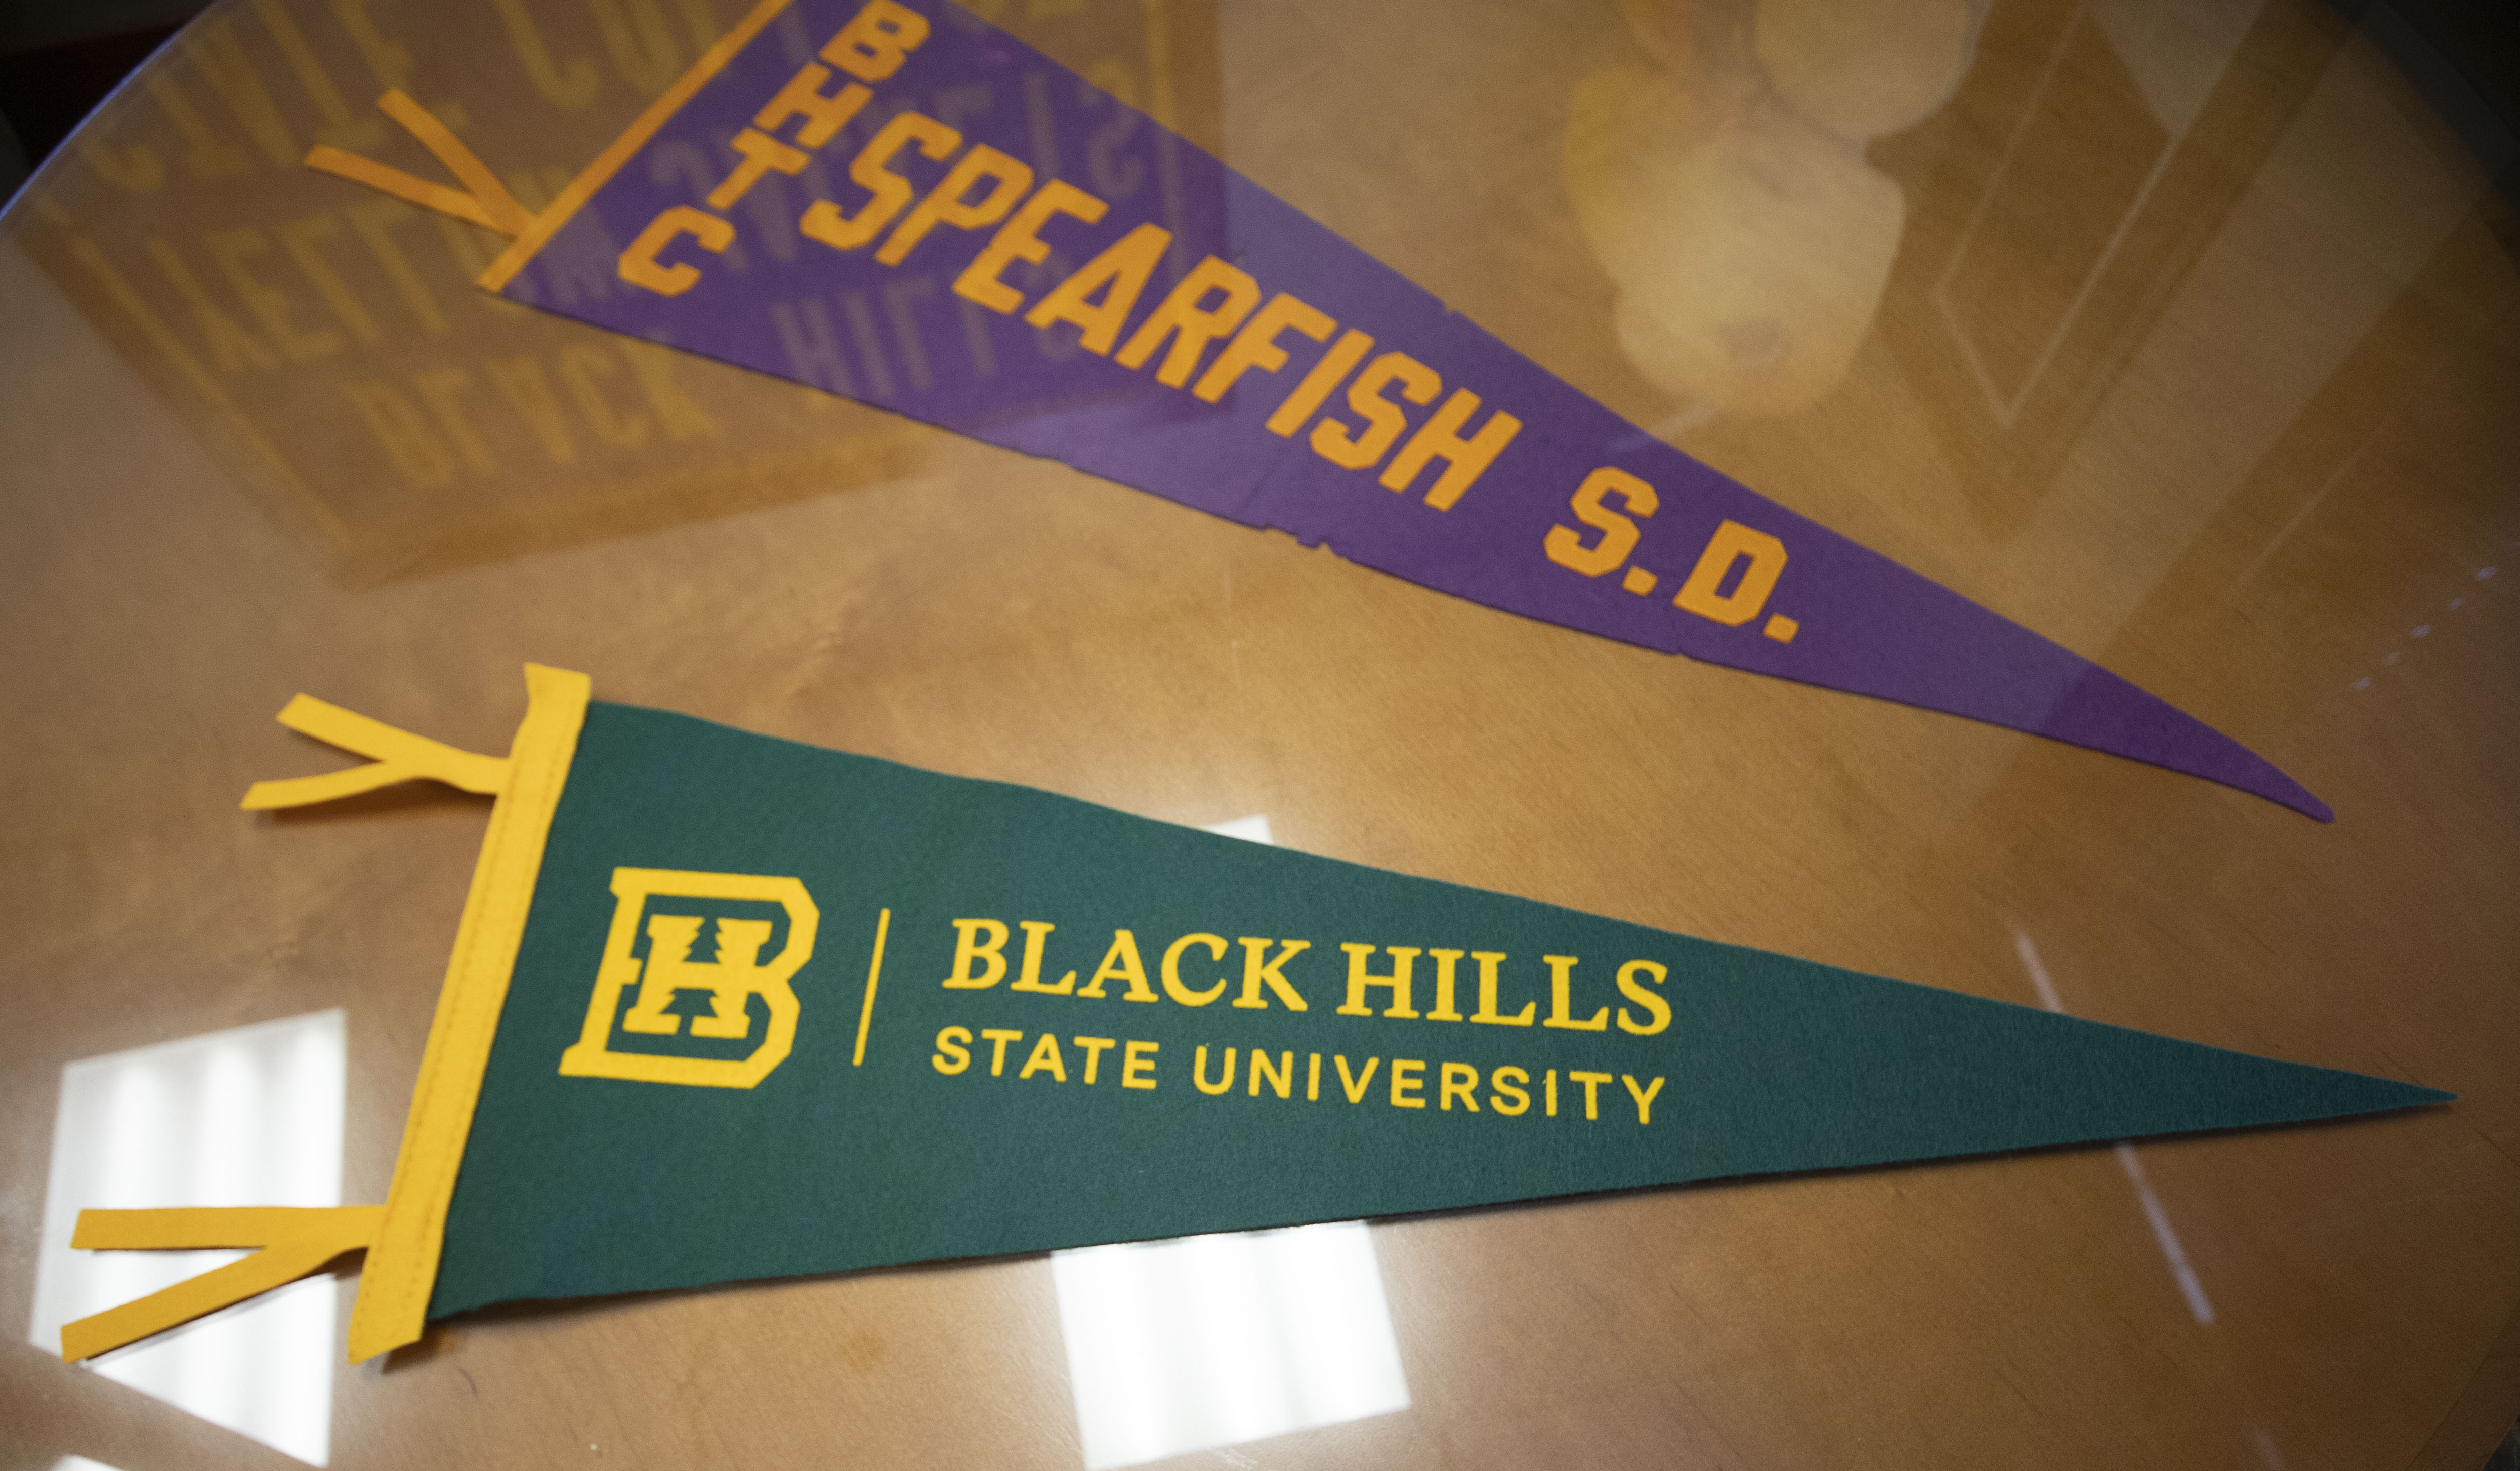 Two pendants for BHSU, one green and gold, the other purple and gold.